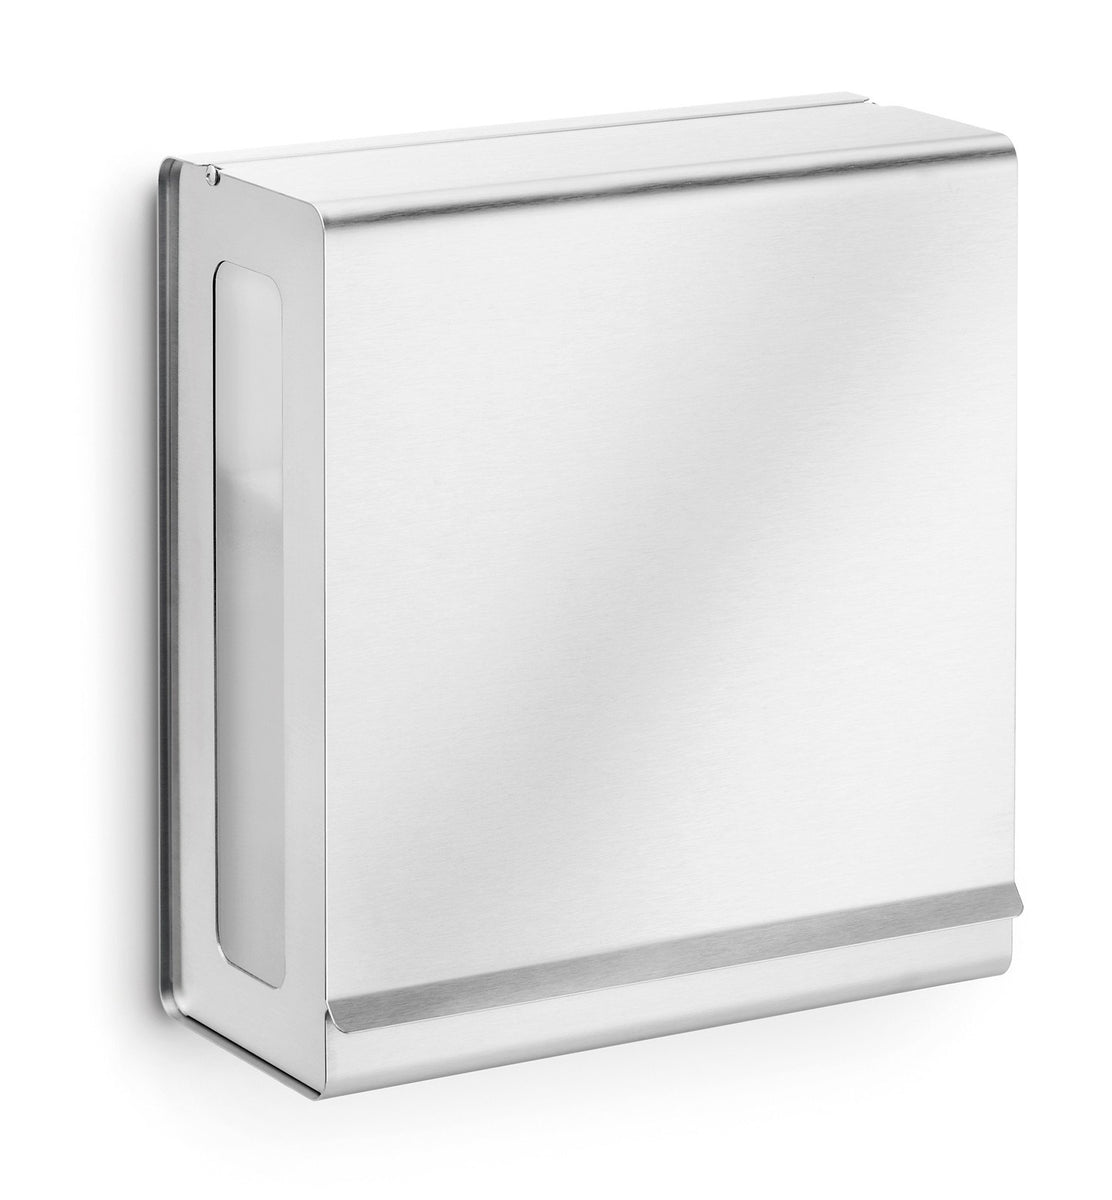 Paper Towel Dispenser, 15.38 x 11.25 x 4.06, Chrome, Stainless Steel,  Wall-Mount, Continental 991C